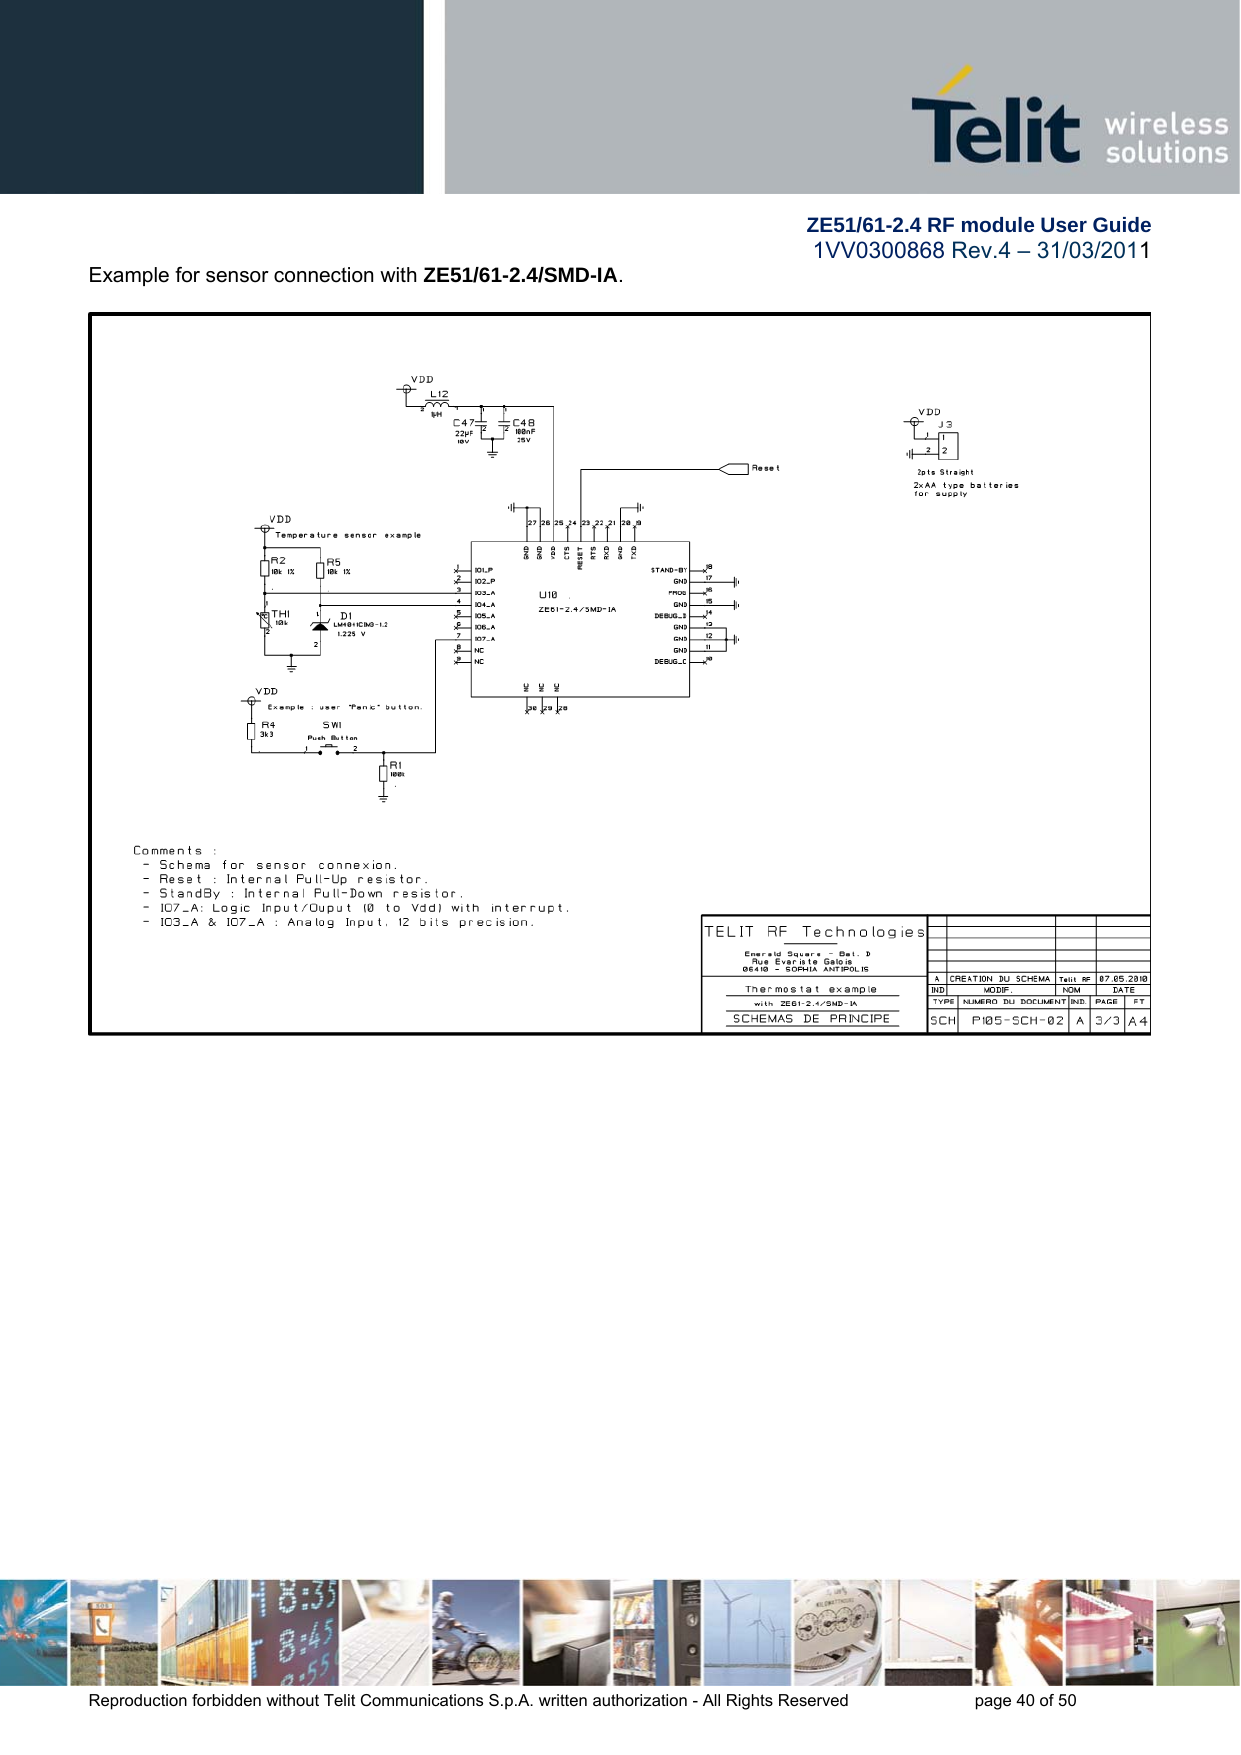         ZE51/61-2.4 RF module User Guide 1VV0300868 Rev.4 – 31/03/2011 Reproduction forbidden without Telit Communications S.p.A. written authorization - All Rights Reserved    page 40 of 50 Example for sensor connection with ZE51/61-2.4/SMD-IA.   